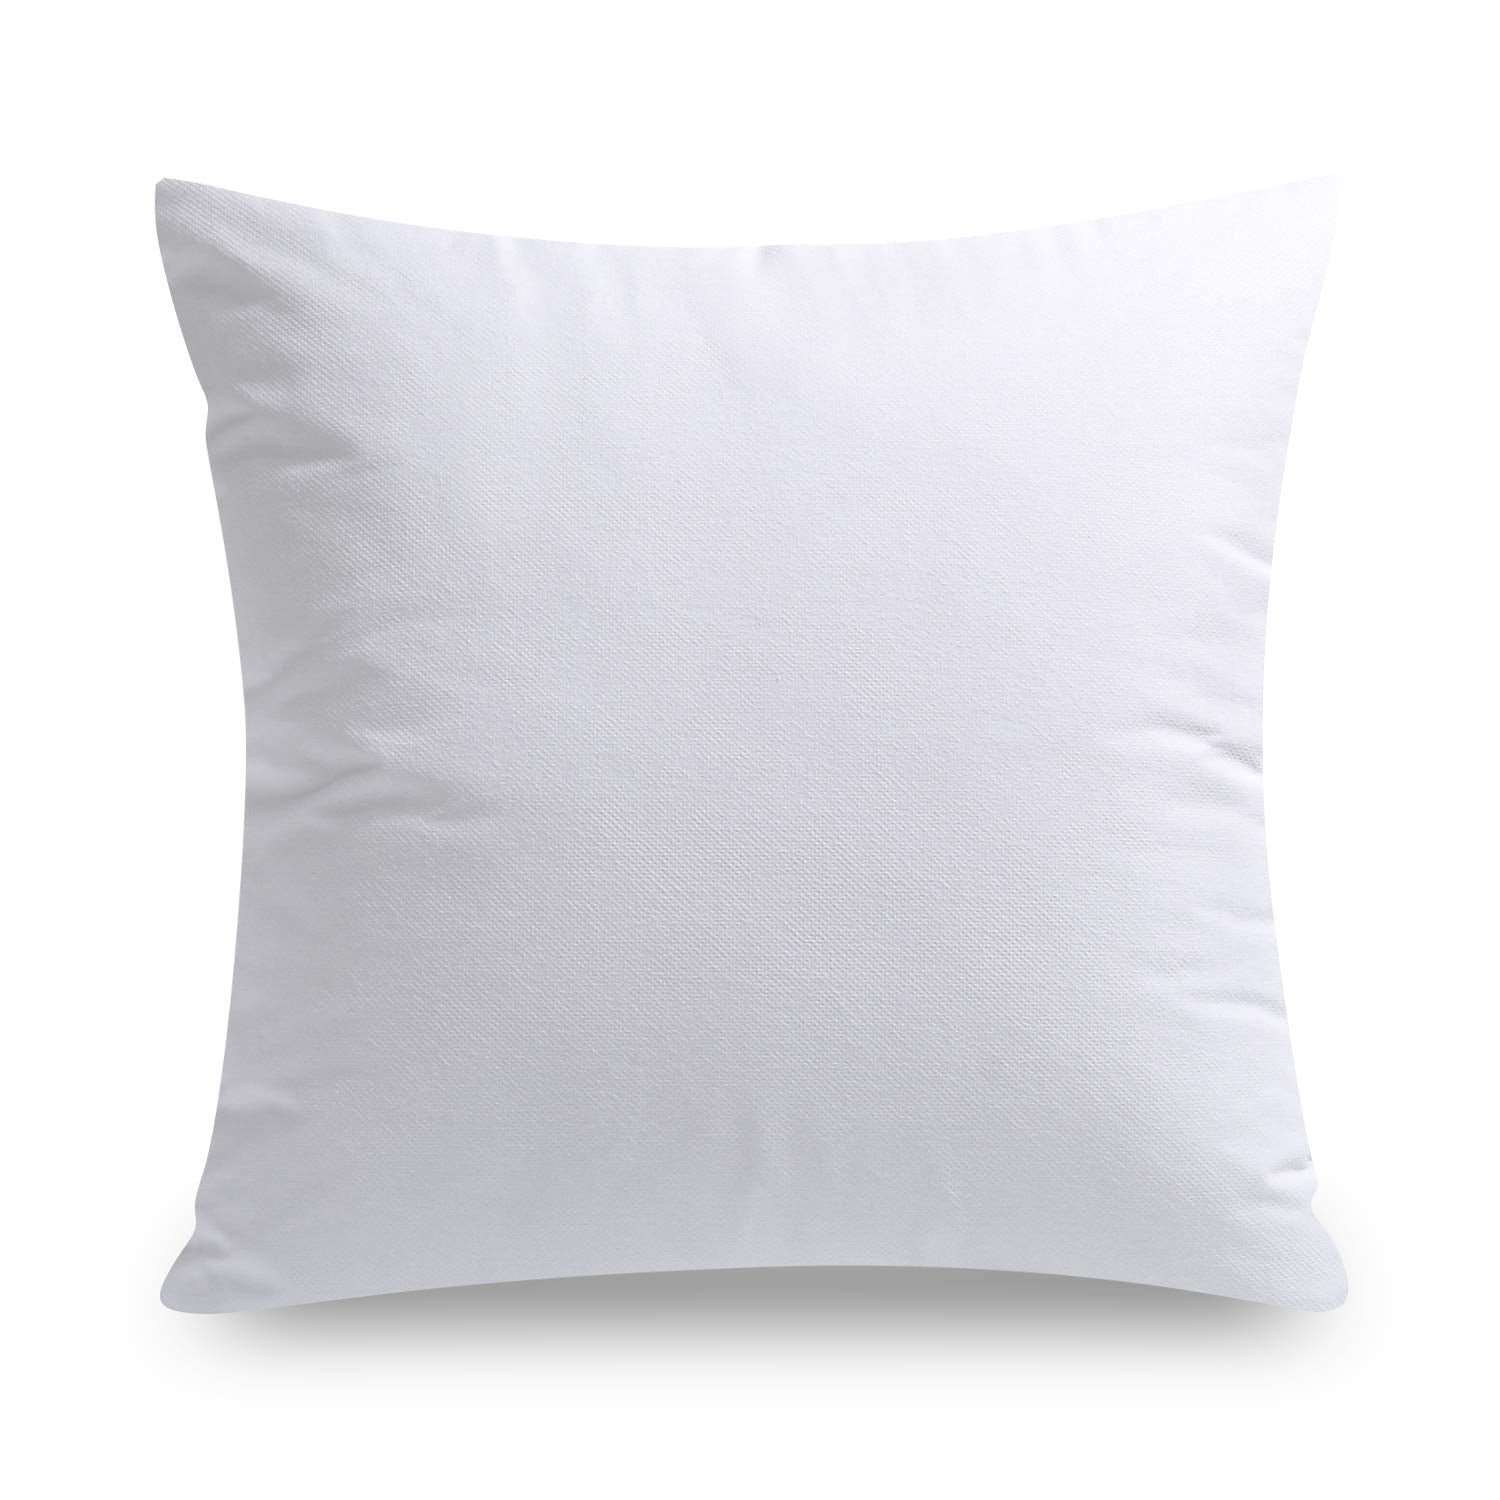 Phantoscope 18 x 18 Pillow Inserts - Pack of 4 Outdoor Water Resistant  Throw Pillow Inserts Hypoallergenic Square Decorative Couch Sham Cushion